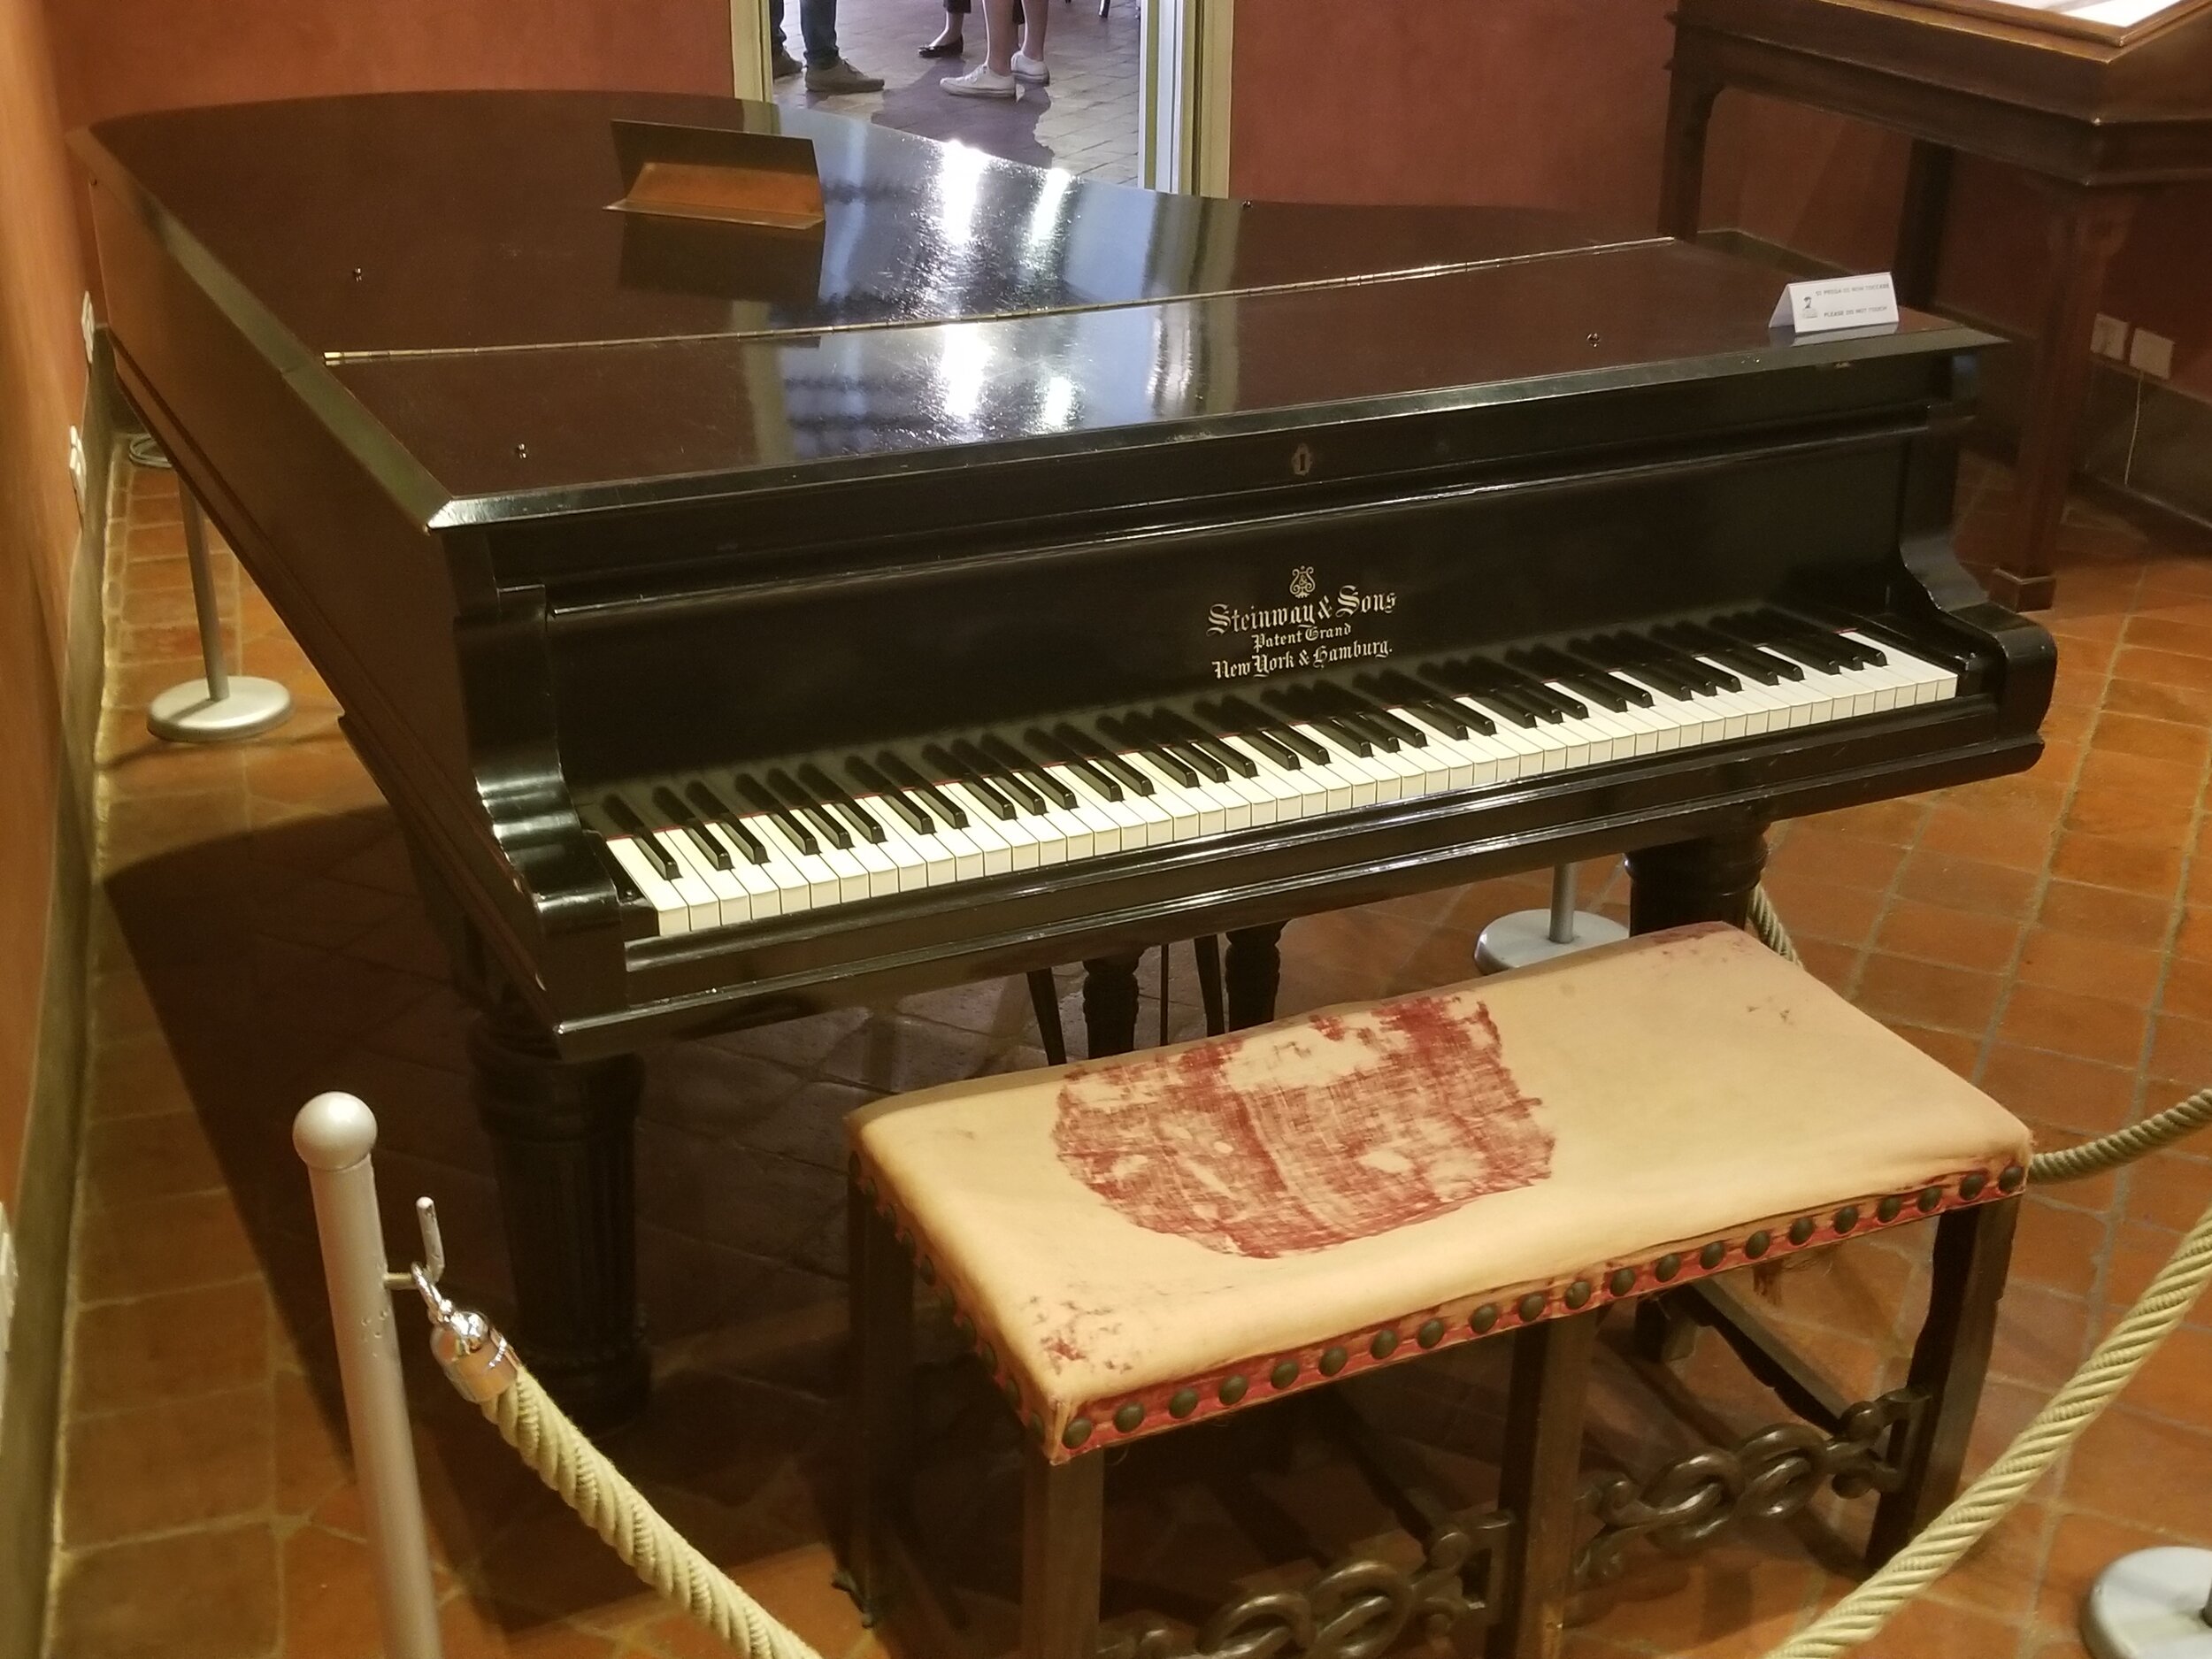 Maestro's Steinway on which he wrote Turandot